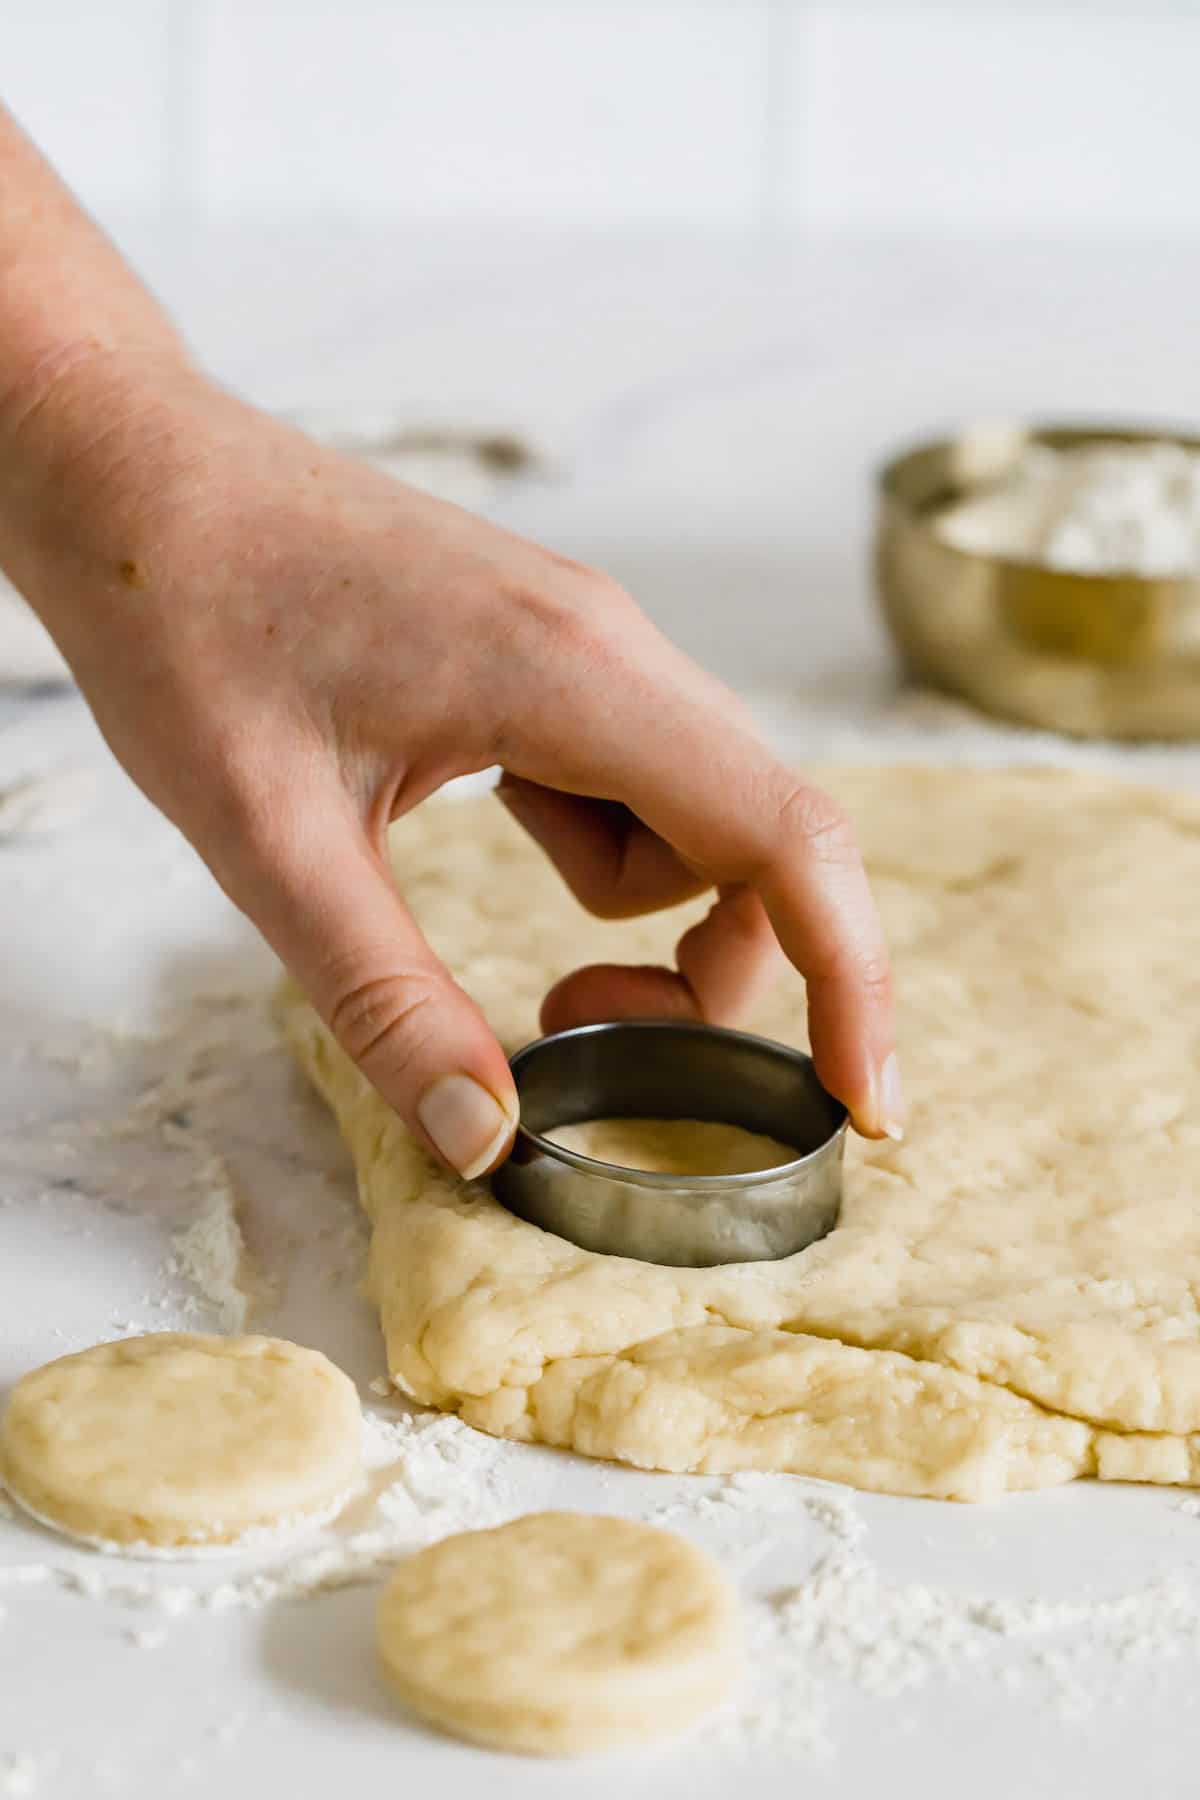 A Cookie Cutter Being Used to Shape Biscuits from the Dough